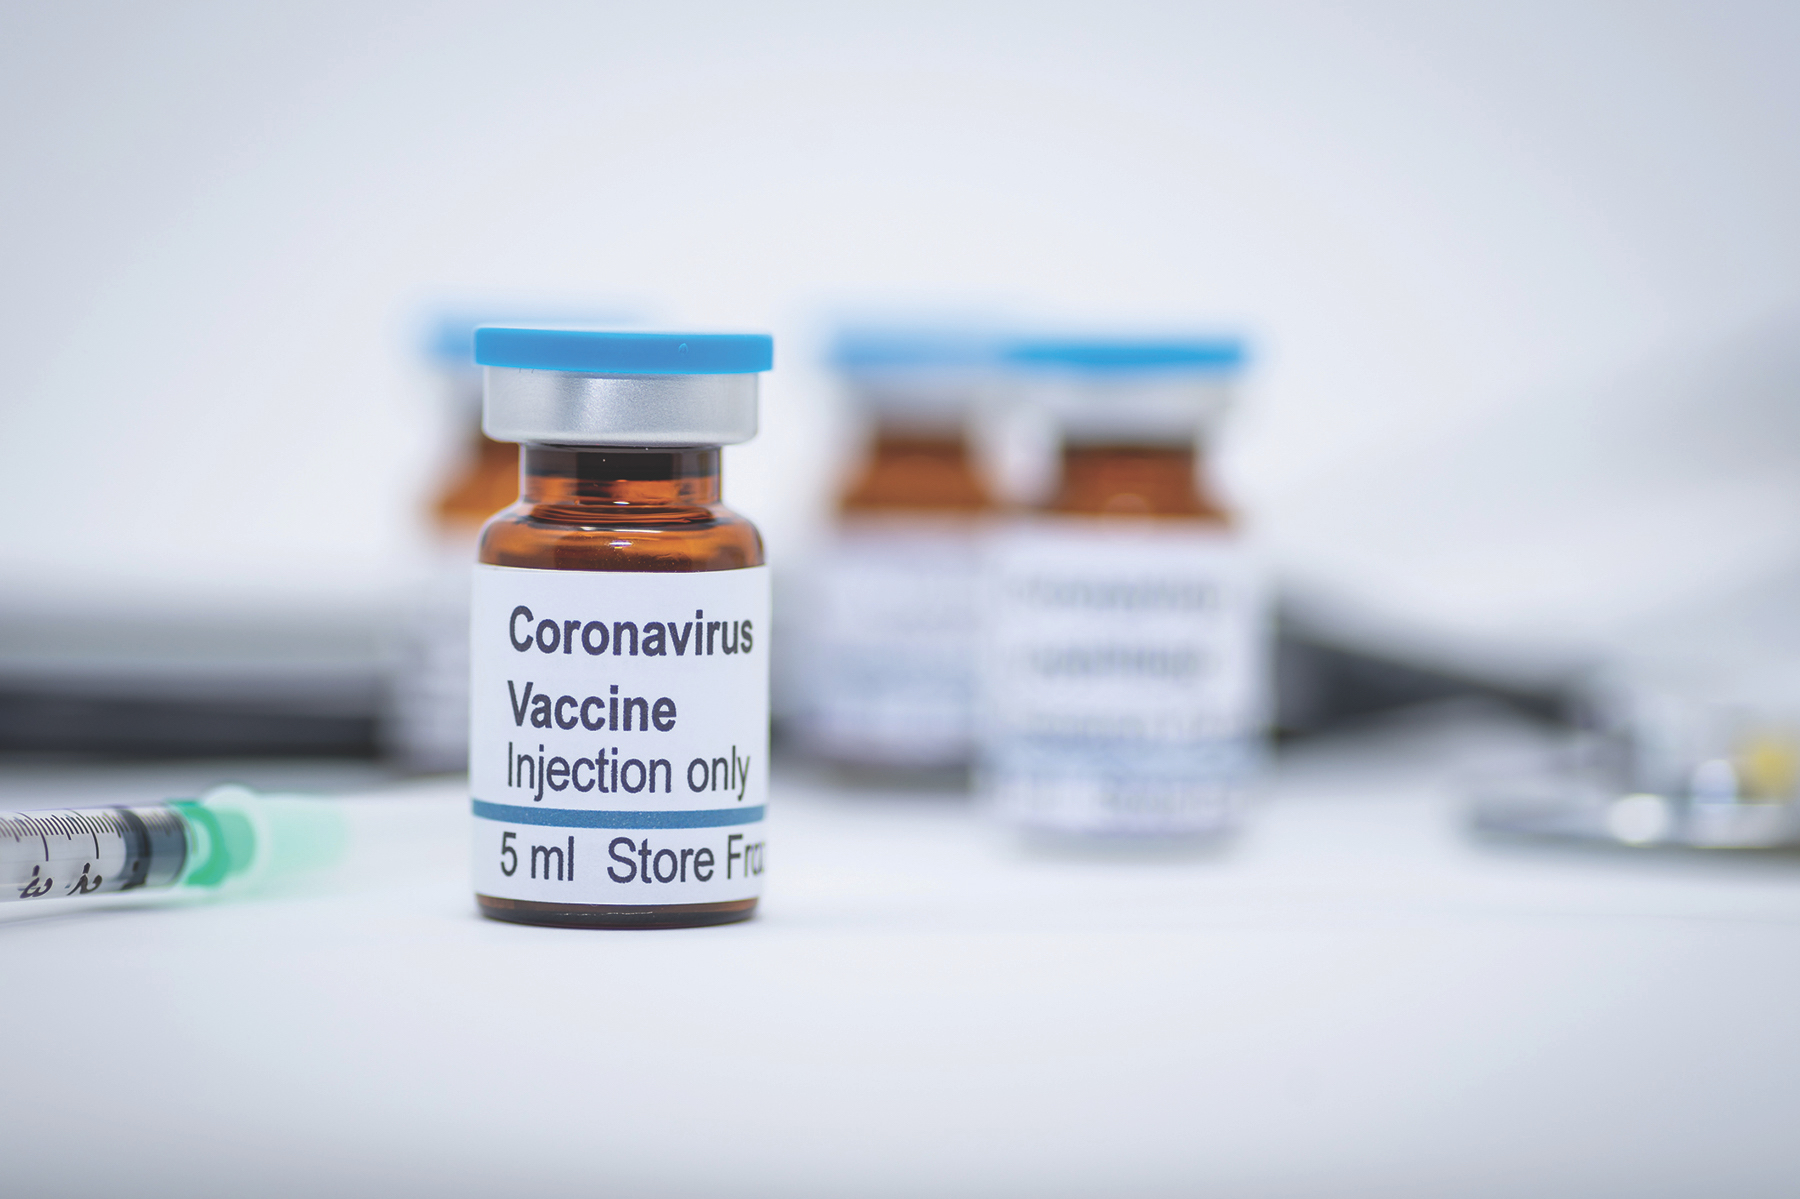 NEWS | COVID-19 vaccine could be rolled out by September if trials are successful